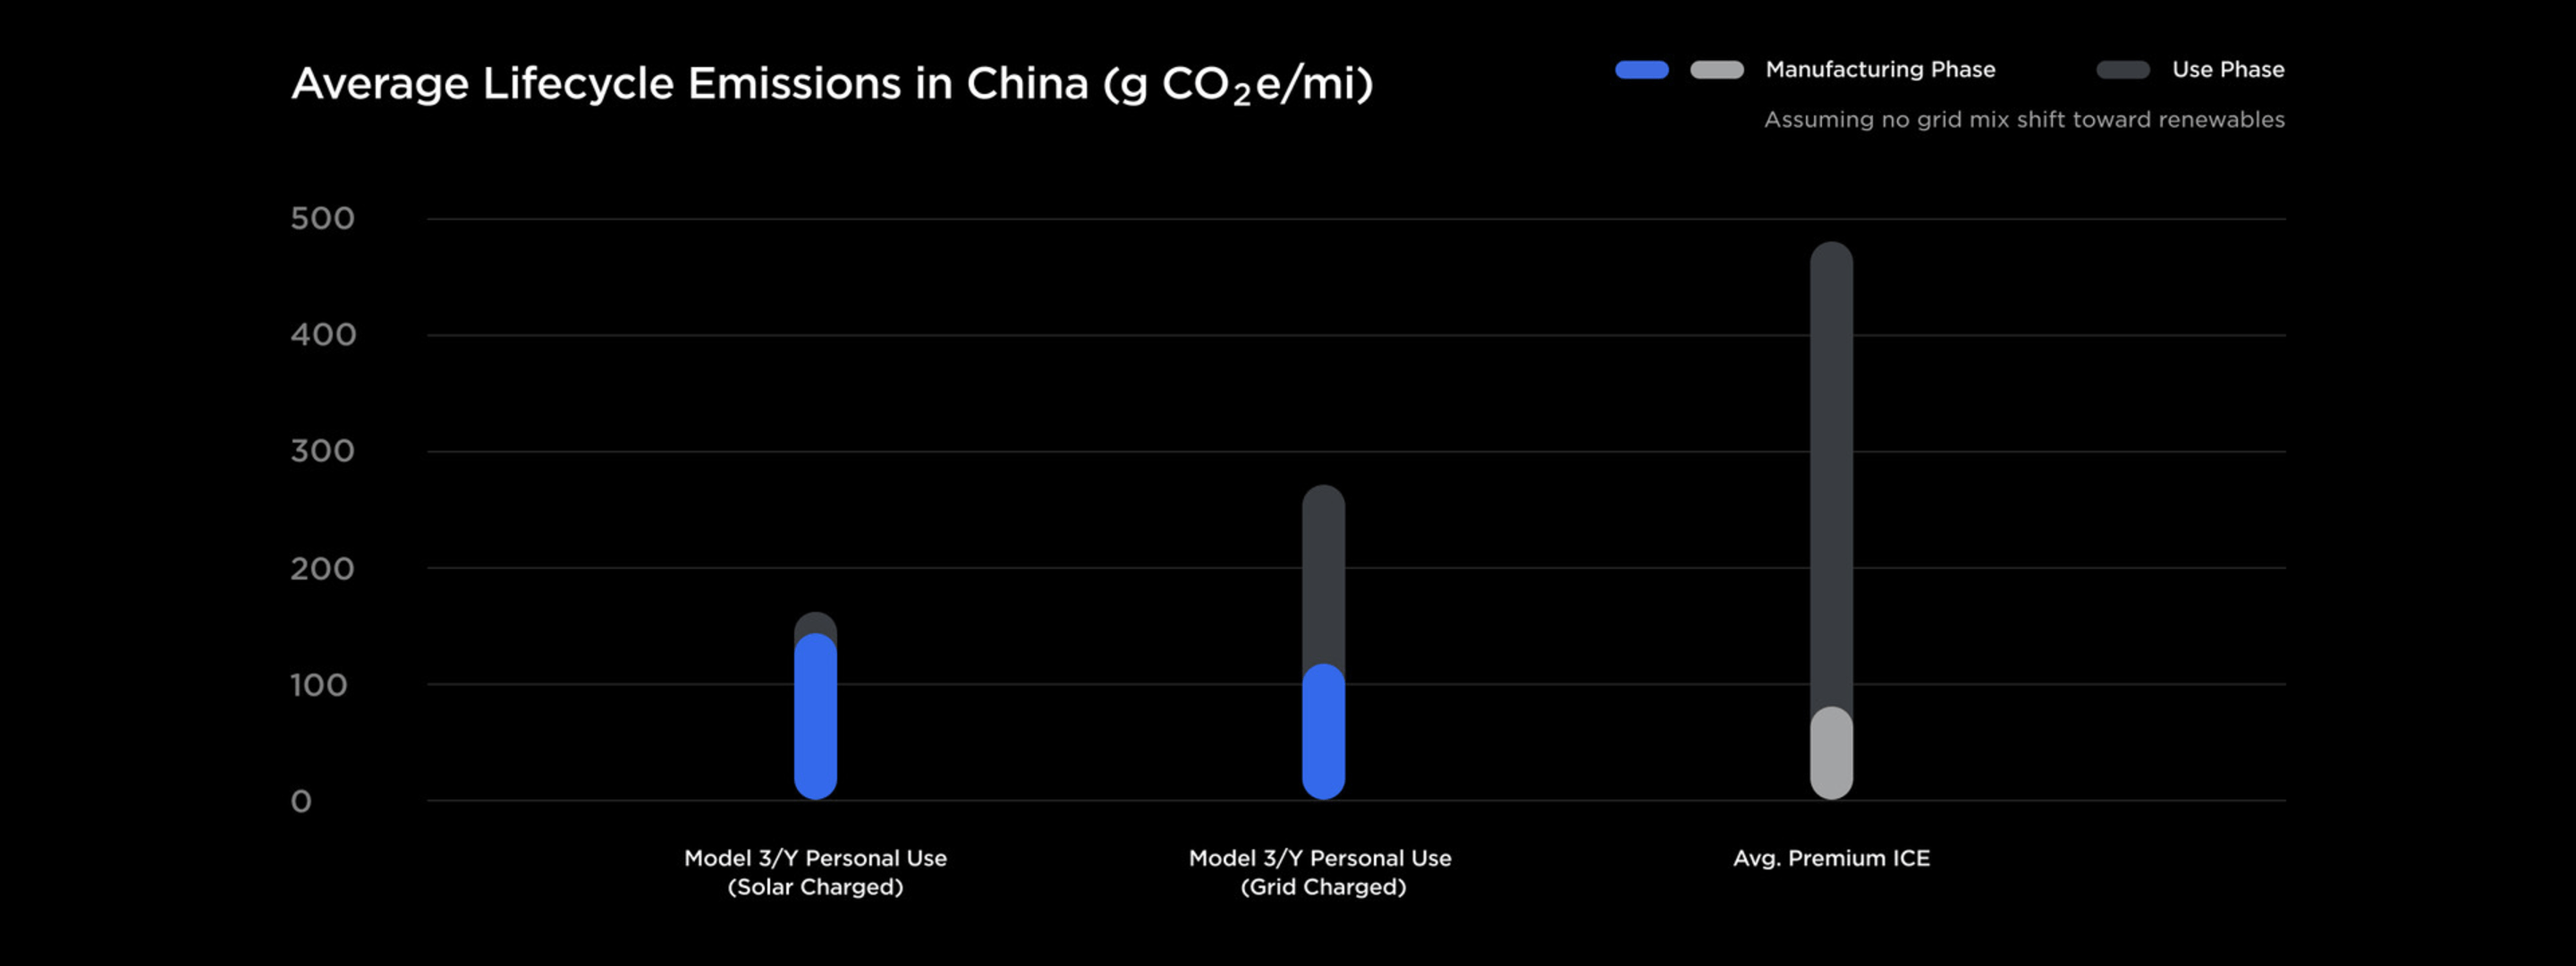 Average lifecycle emissions in China